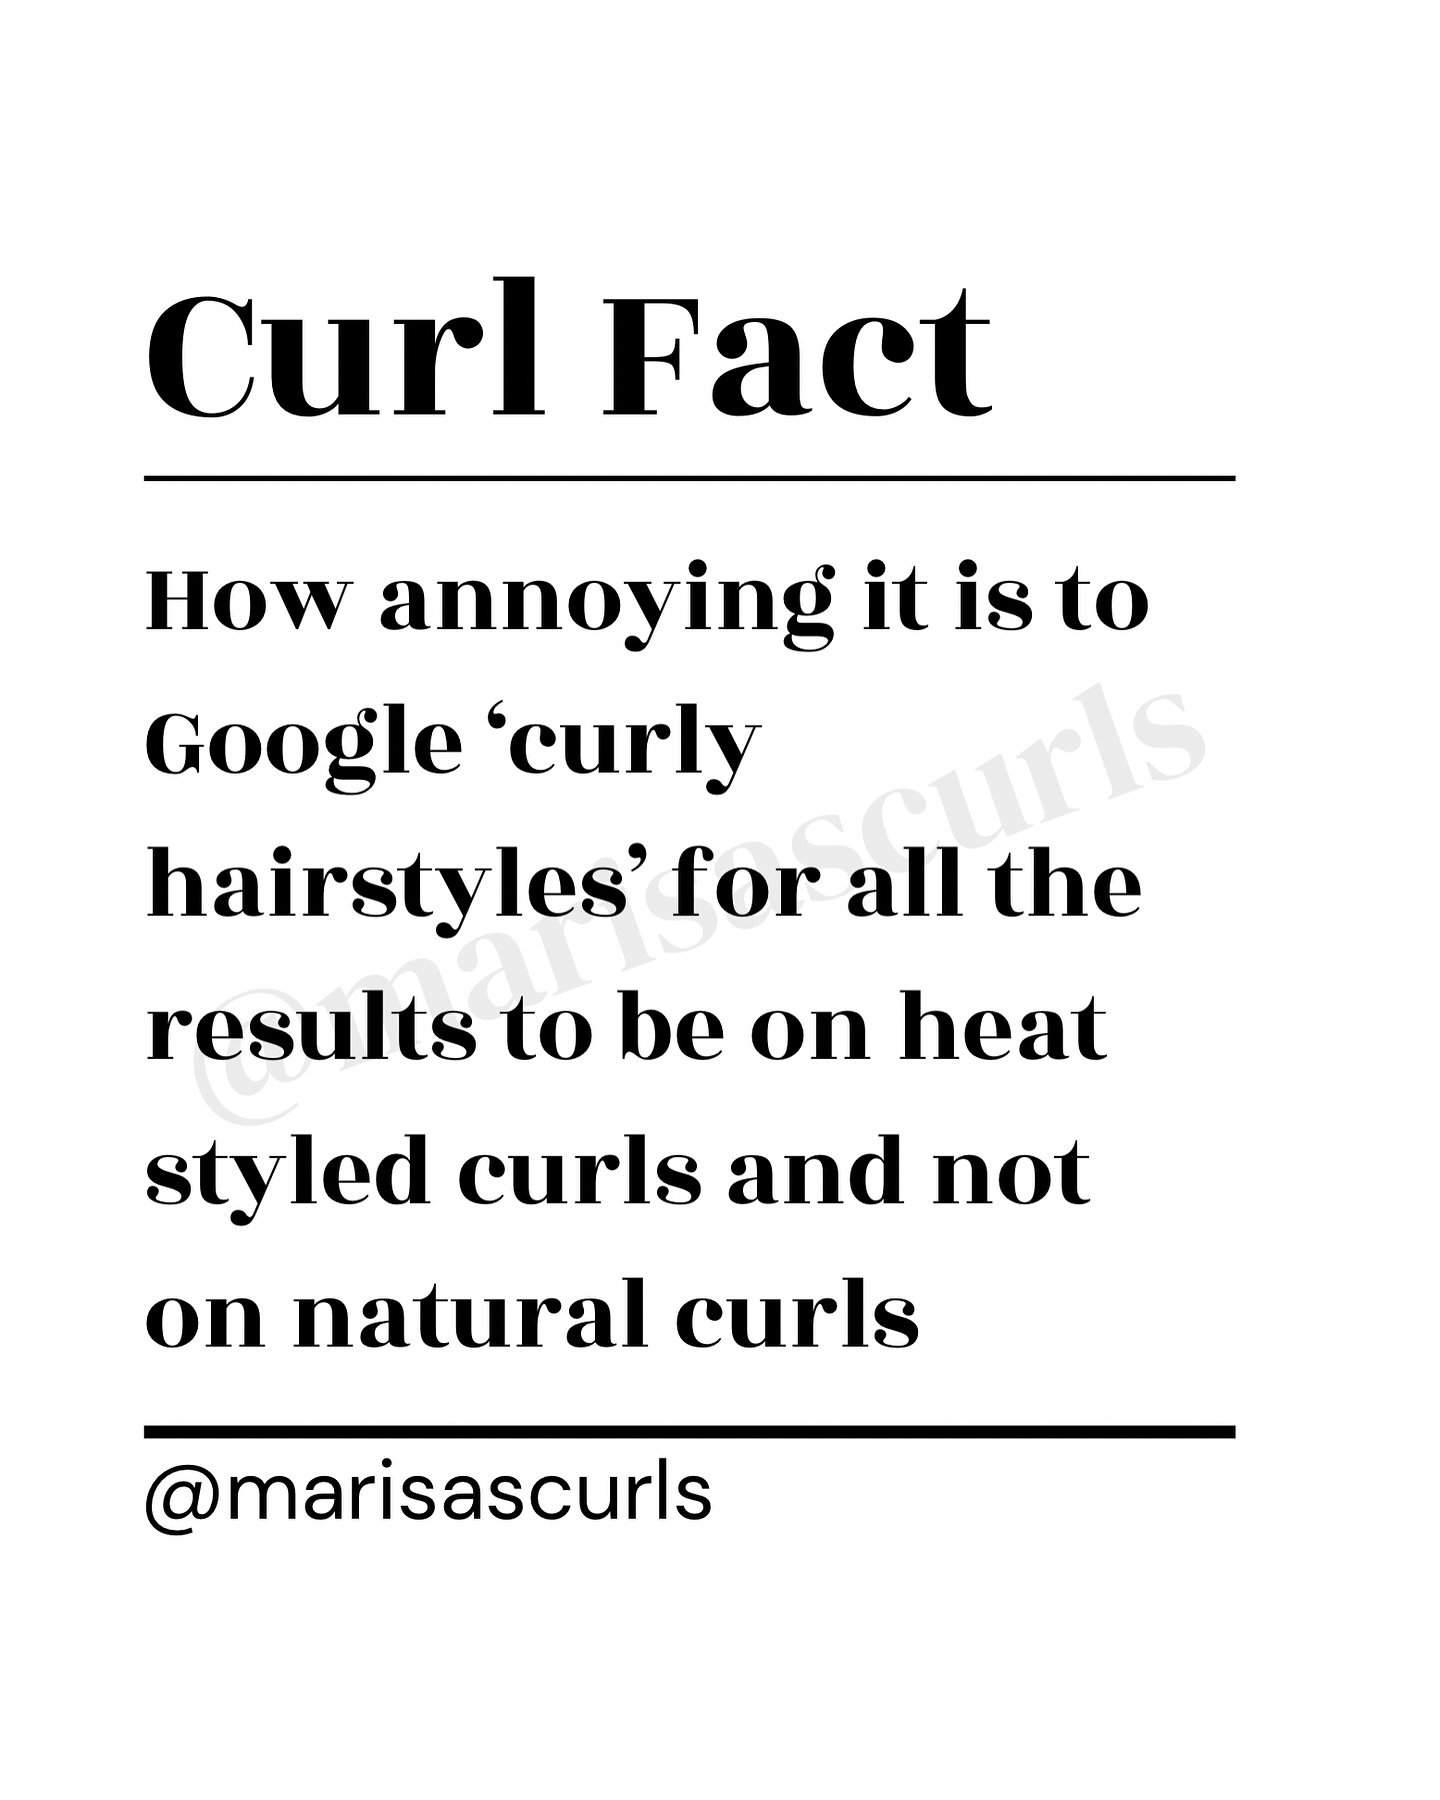 We just want realistic curly hairstyles for natural curls!!! Is it too much to ask??

Seriously though, if you are looking for some inspo for curly updos I have quite a few in my curly updo highlight 😃

#curlyhair #curlyhairstyles #curlyupdo #curlfa